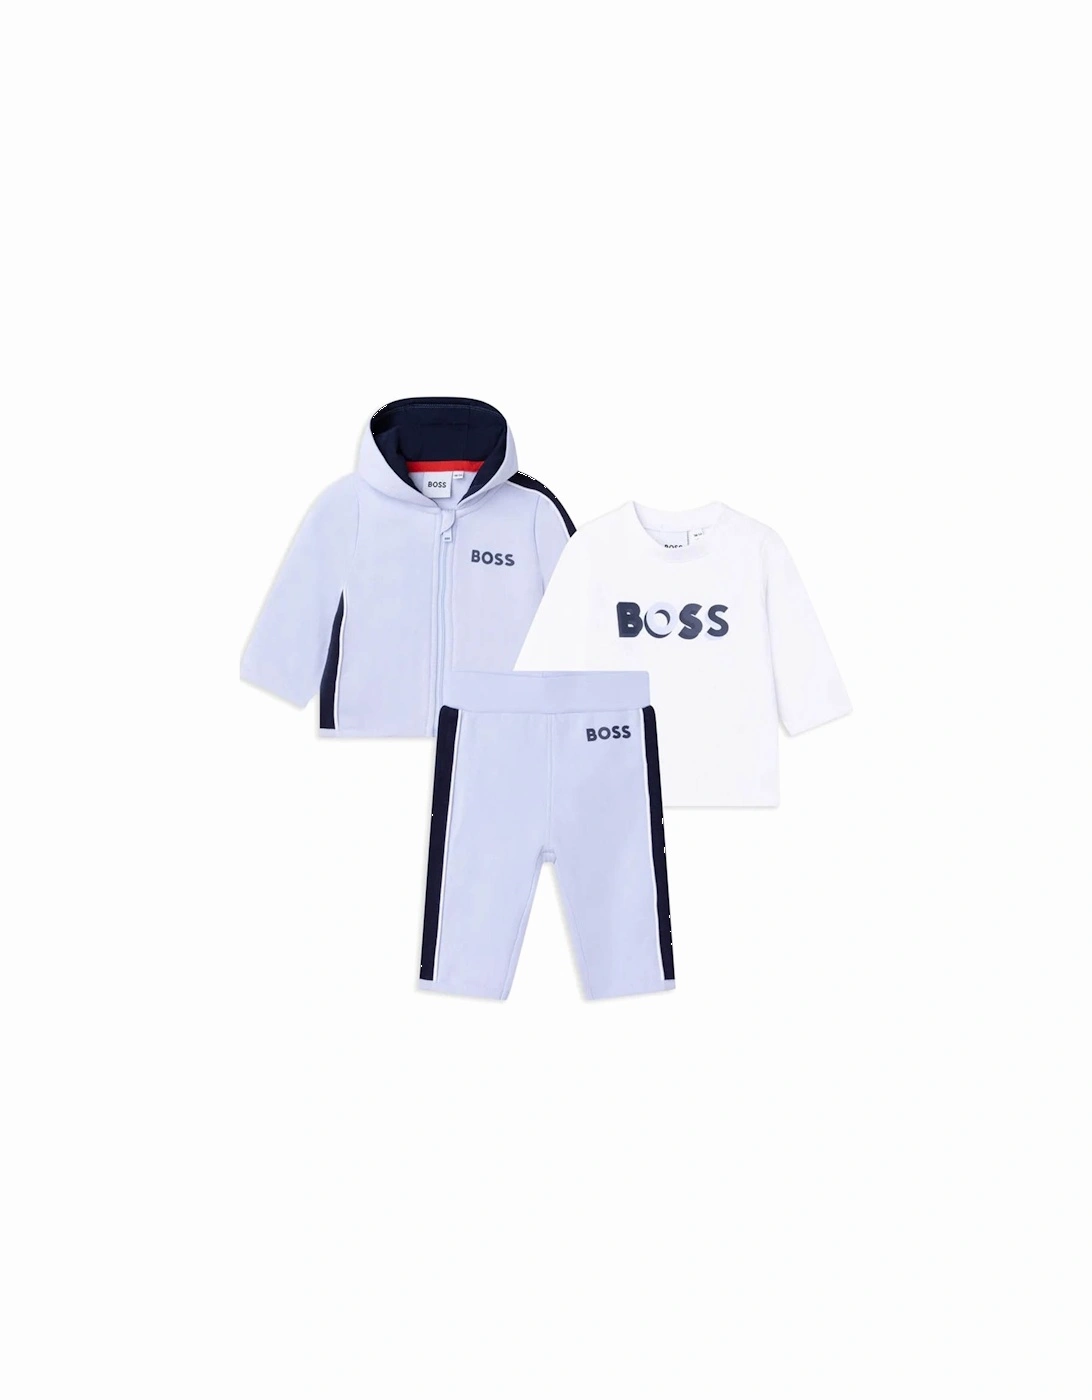 Boss Baby Boys Tracksuit & T-shirt Set in Blue and White, 6 of 5